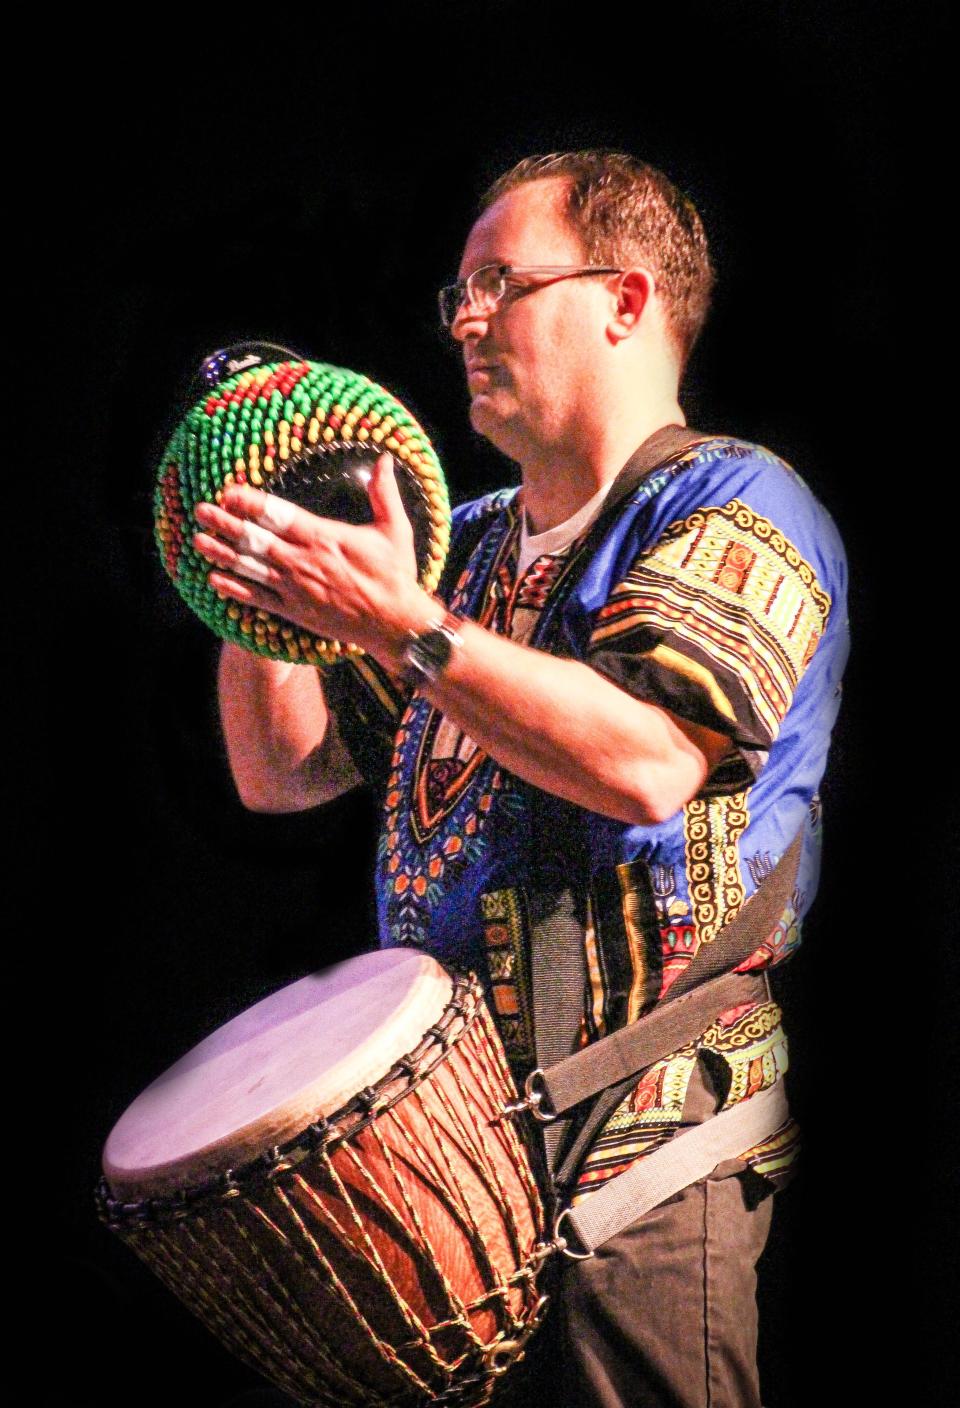 When his African drumming students perform this weekend at San Juan College, music professor Teun Fetz hopes the the concert attracts other members to the group, which has been around for seven years.